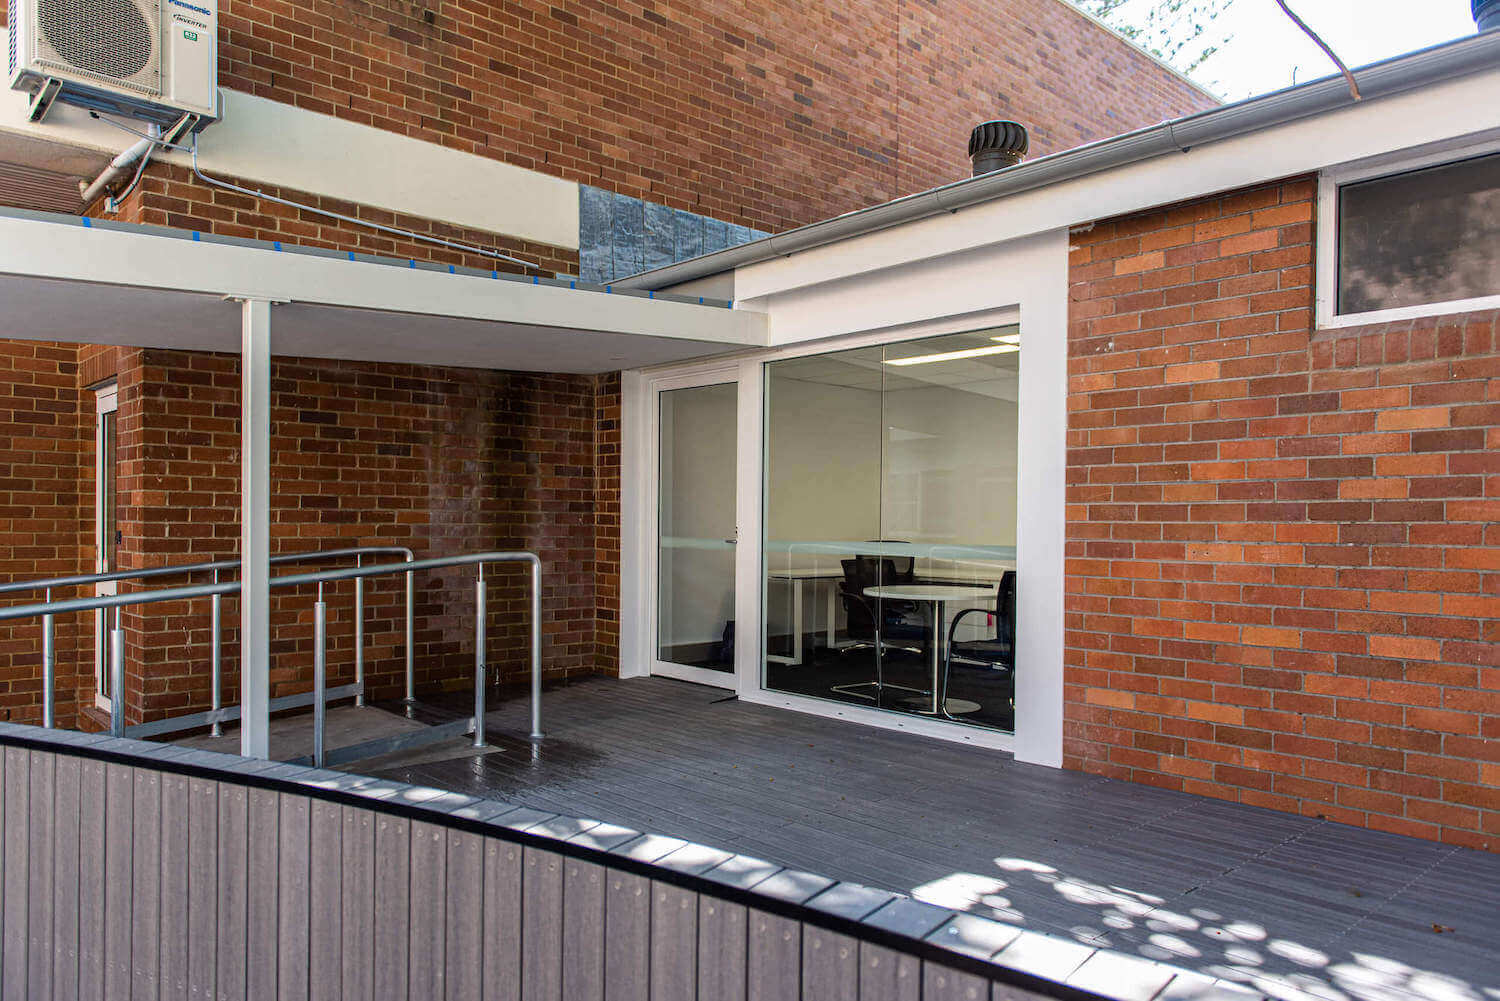 Innovative School Refurbishments: Enhancing Learning And Comfort / 2 Types Constructions